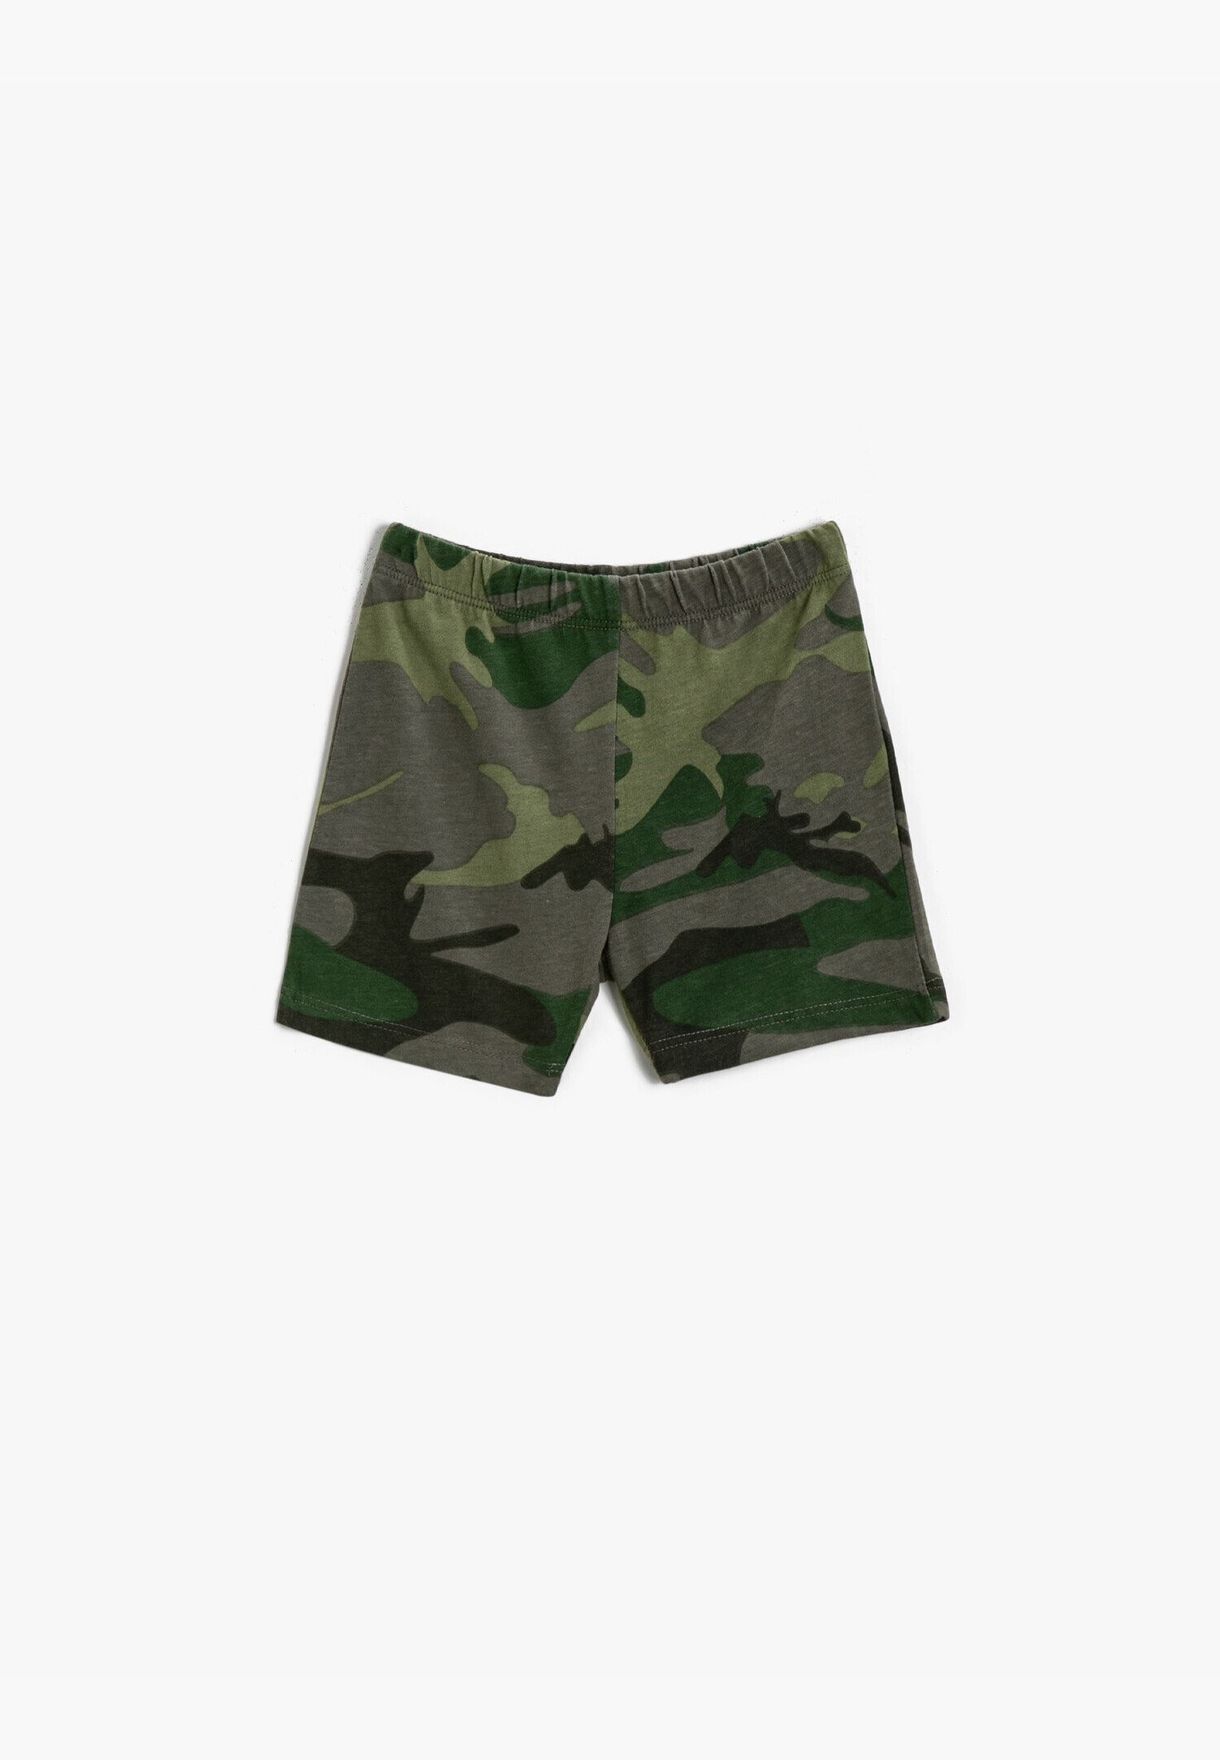 Camouflage Printed Shorts Cotton